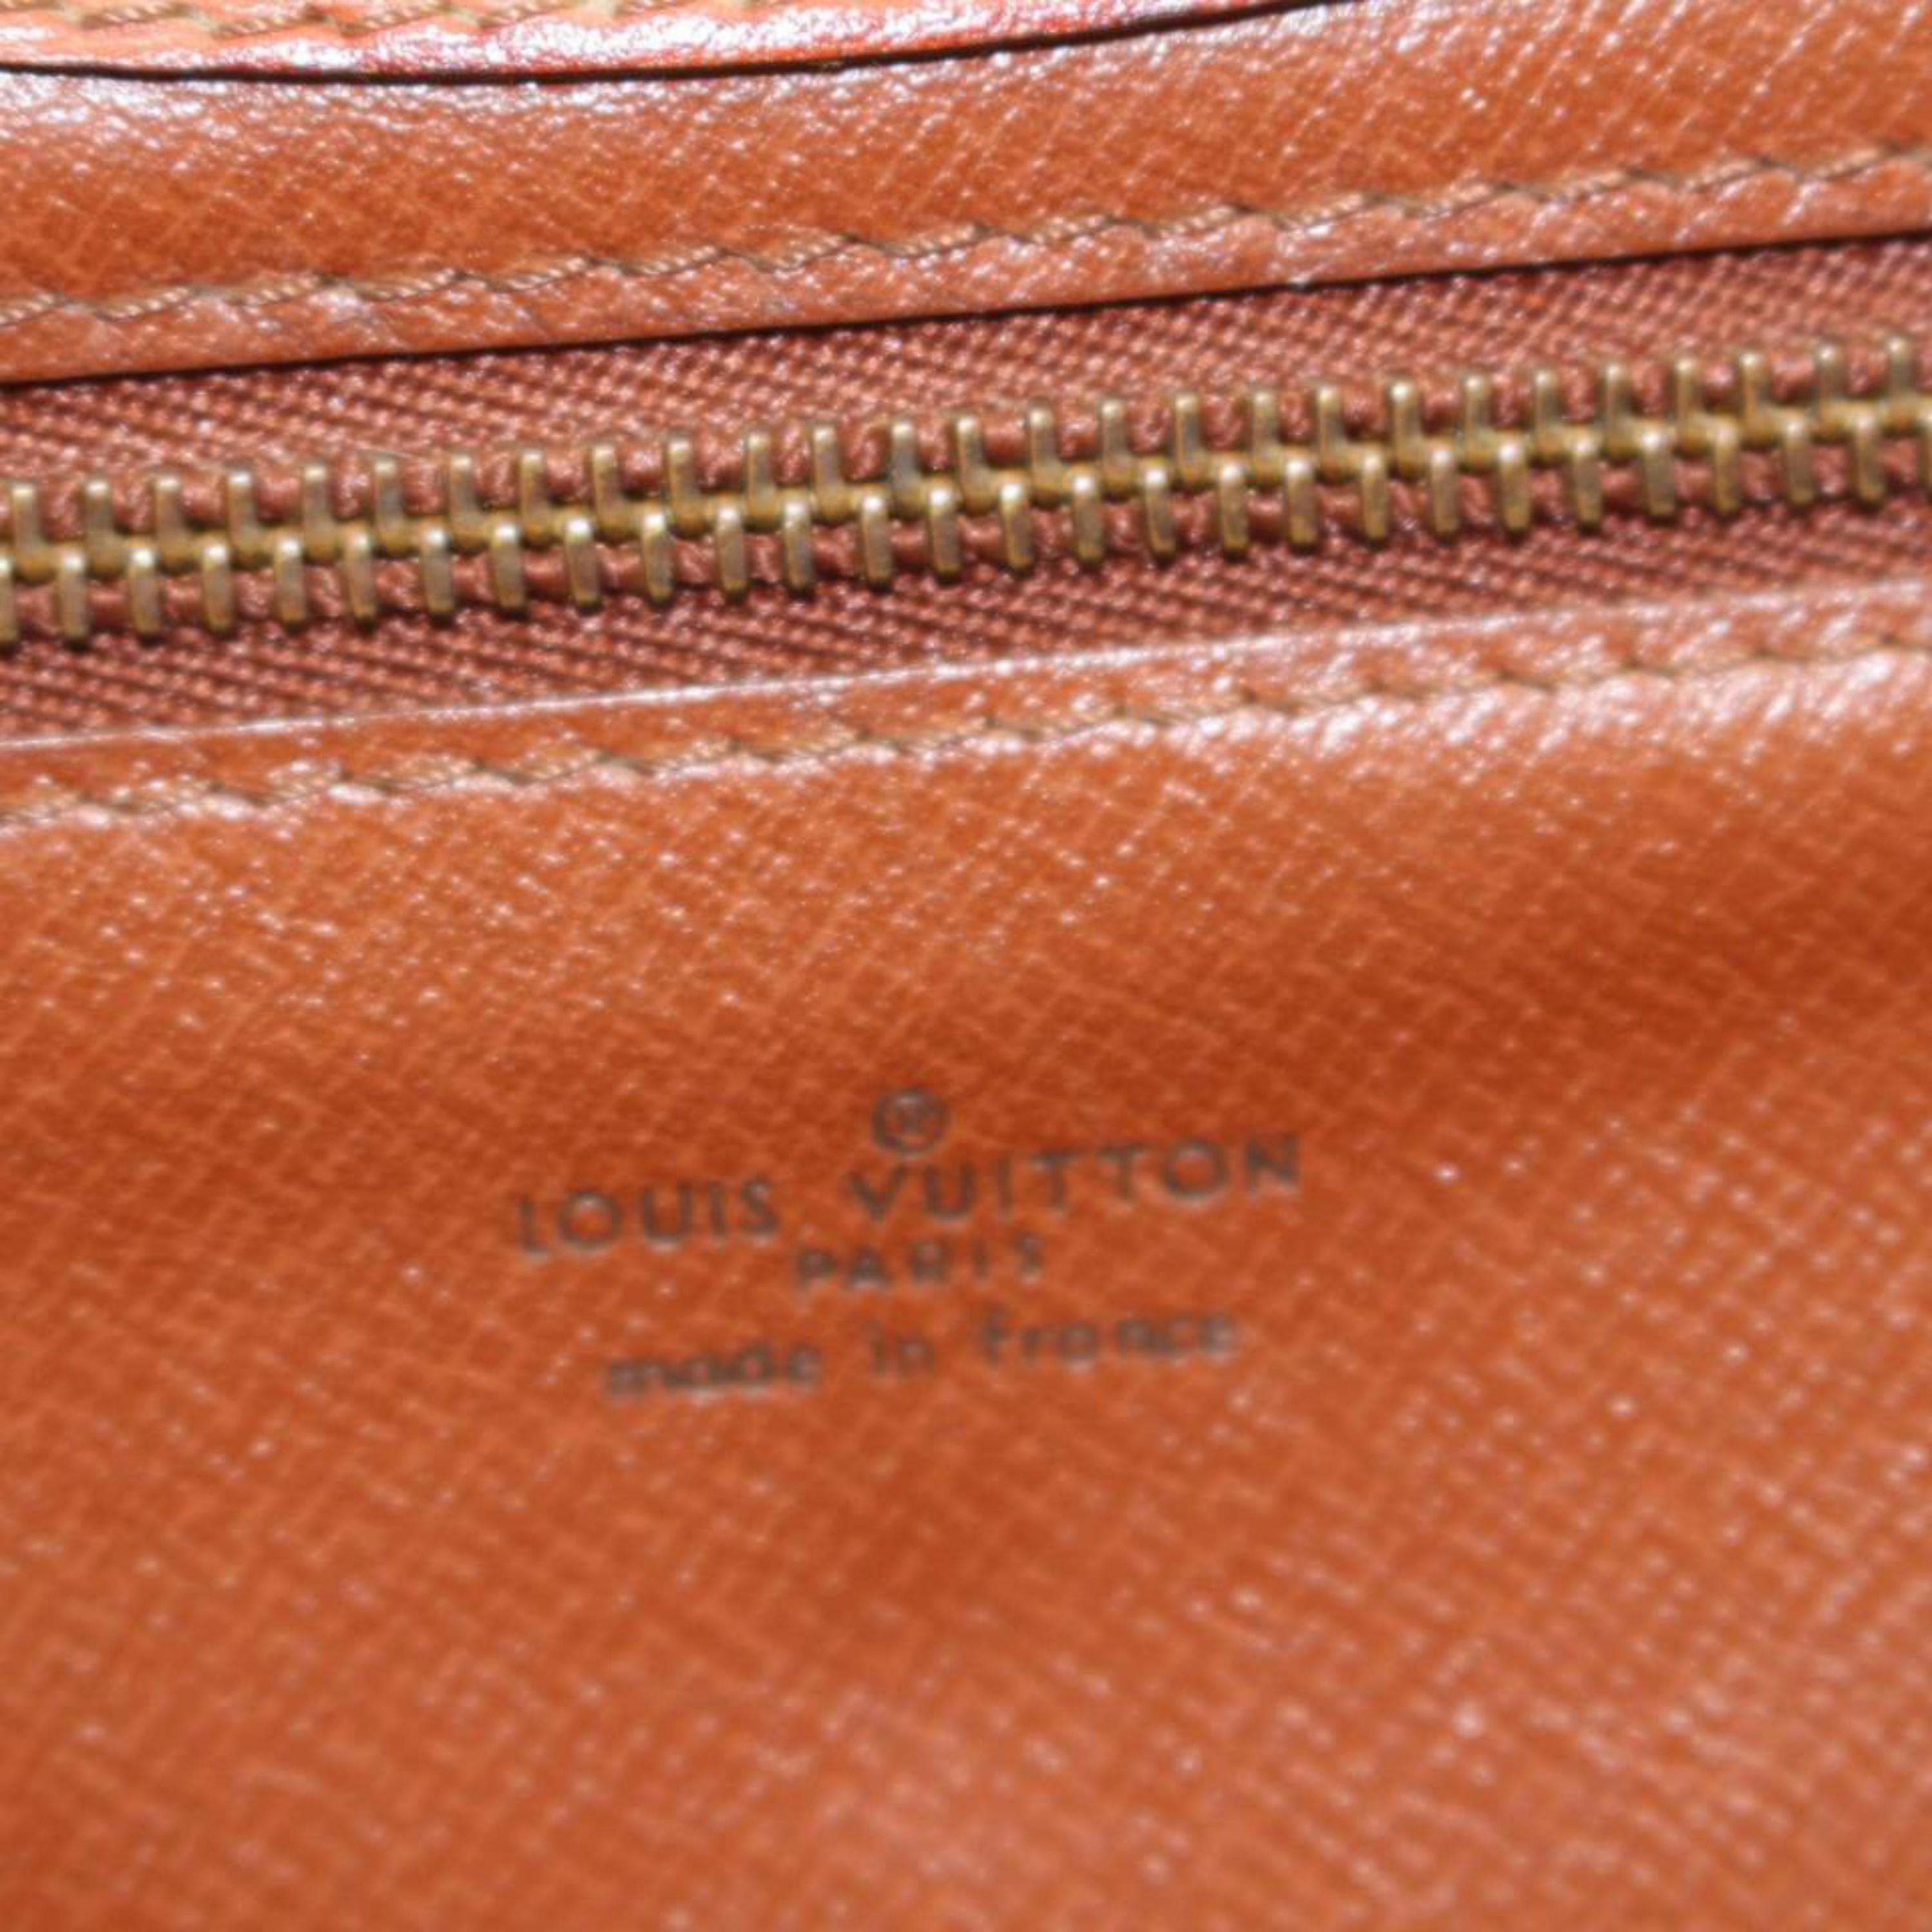 Louis Vuitton Montaigne 867317 Brown Leather Clutch In Good Condition For Sale In Forest Hills, NY